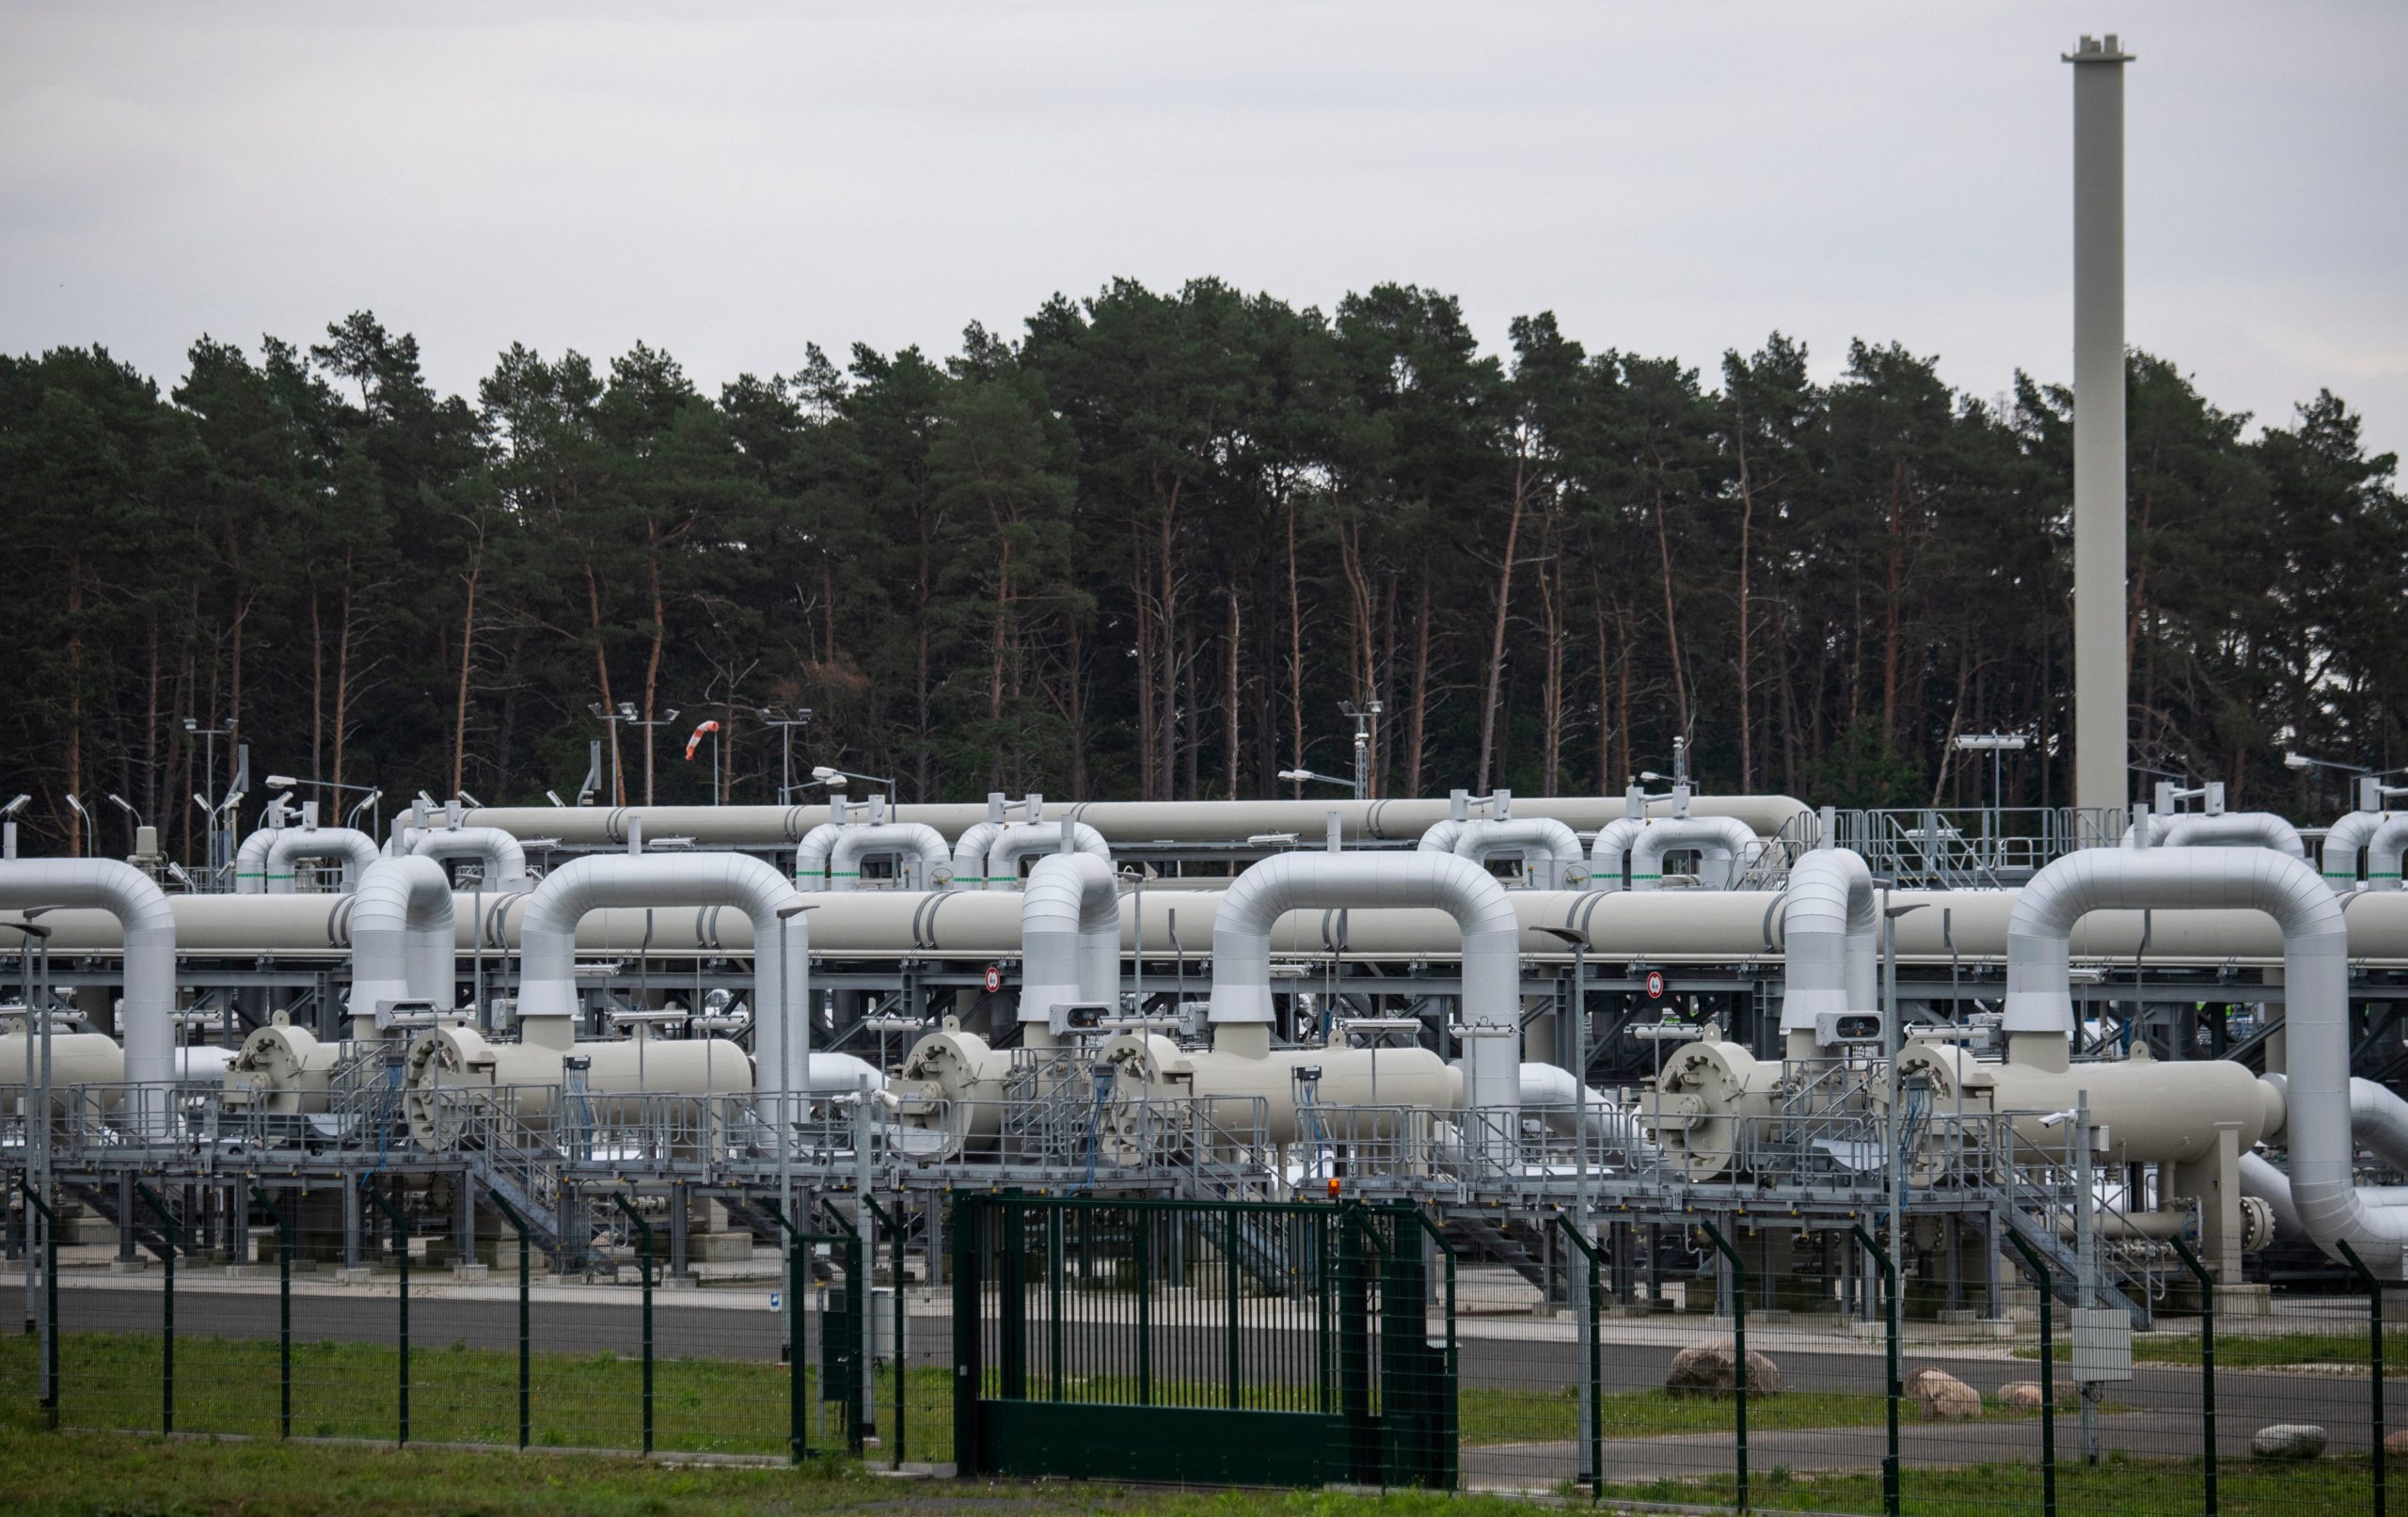 A photo of the Pipeline Inspection Gauge receiving station, the Nord Stream 2 part of the landfall area in Lubmin on Germany's Baltic Sea coast, taken on Sept. 21. (John MacDougall/AFP via Getty Images)